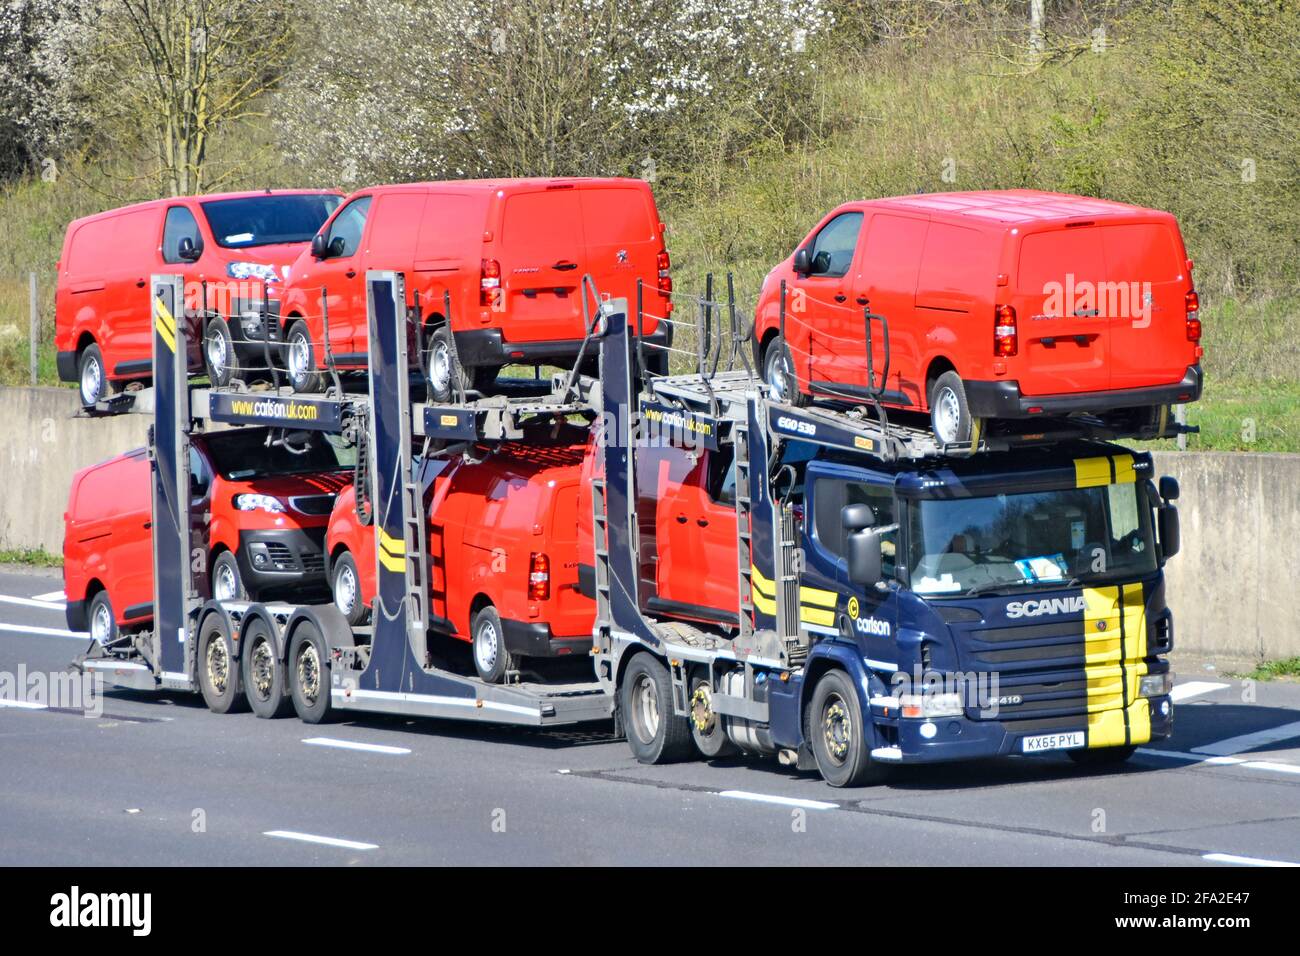 Loaded lorry truck car distribution transporter trailer to transport & deliver six new red Peugeot Expert brand of vans driving on motorway England UK Stock Photo